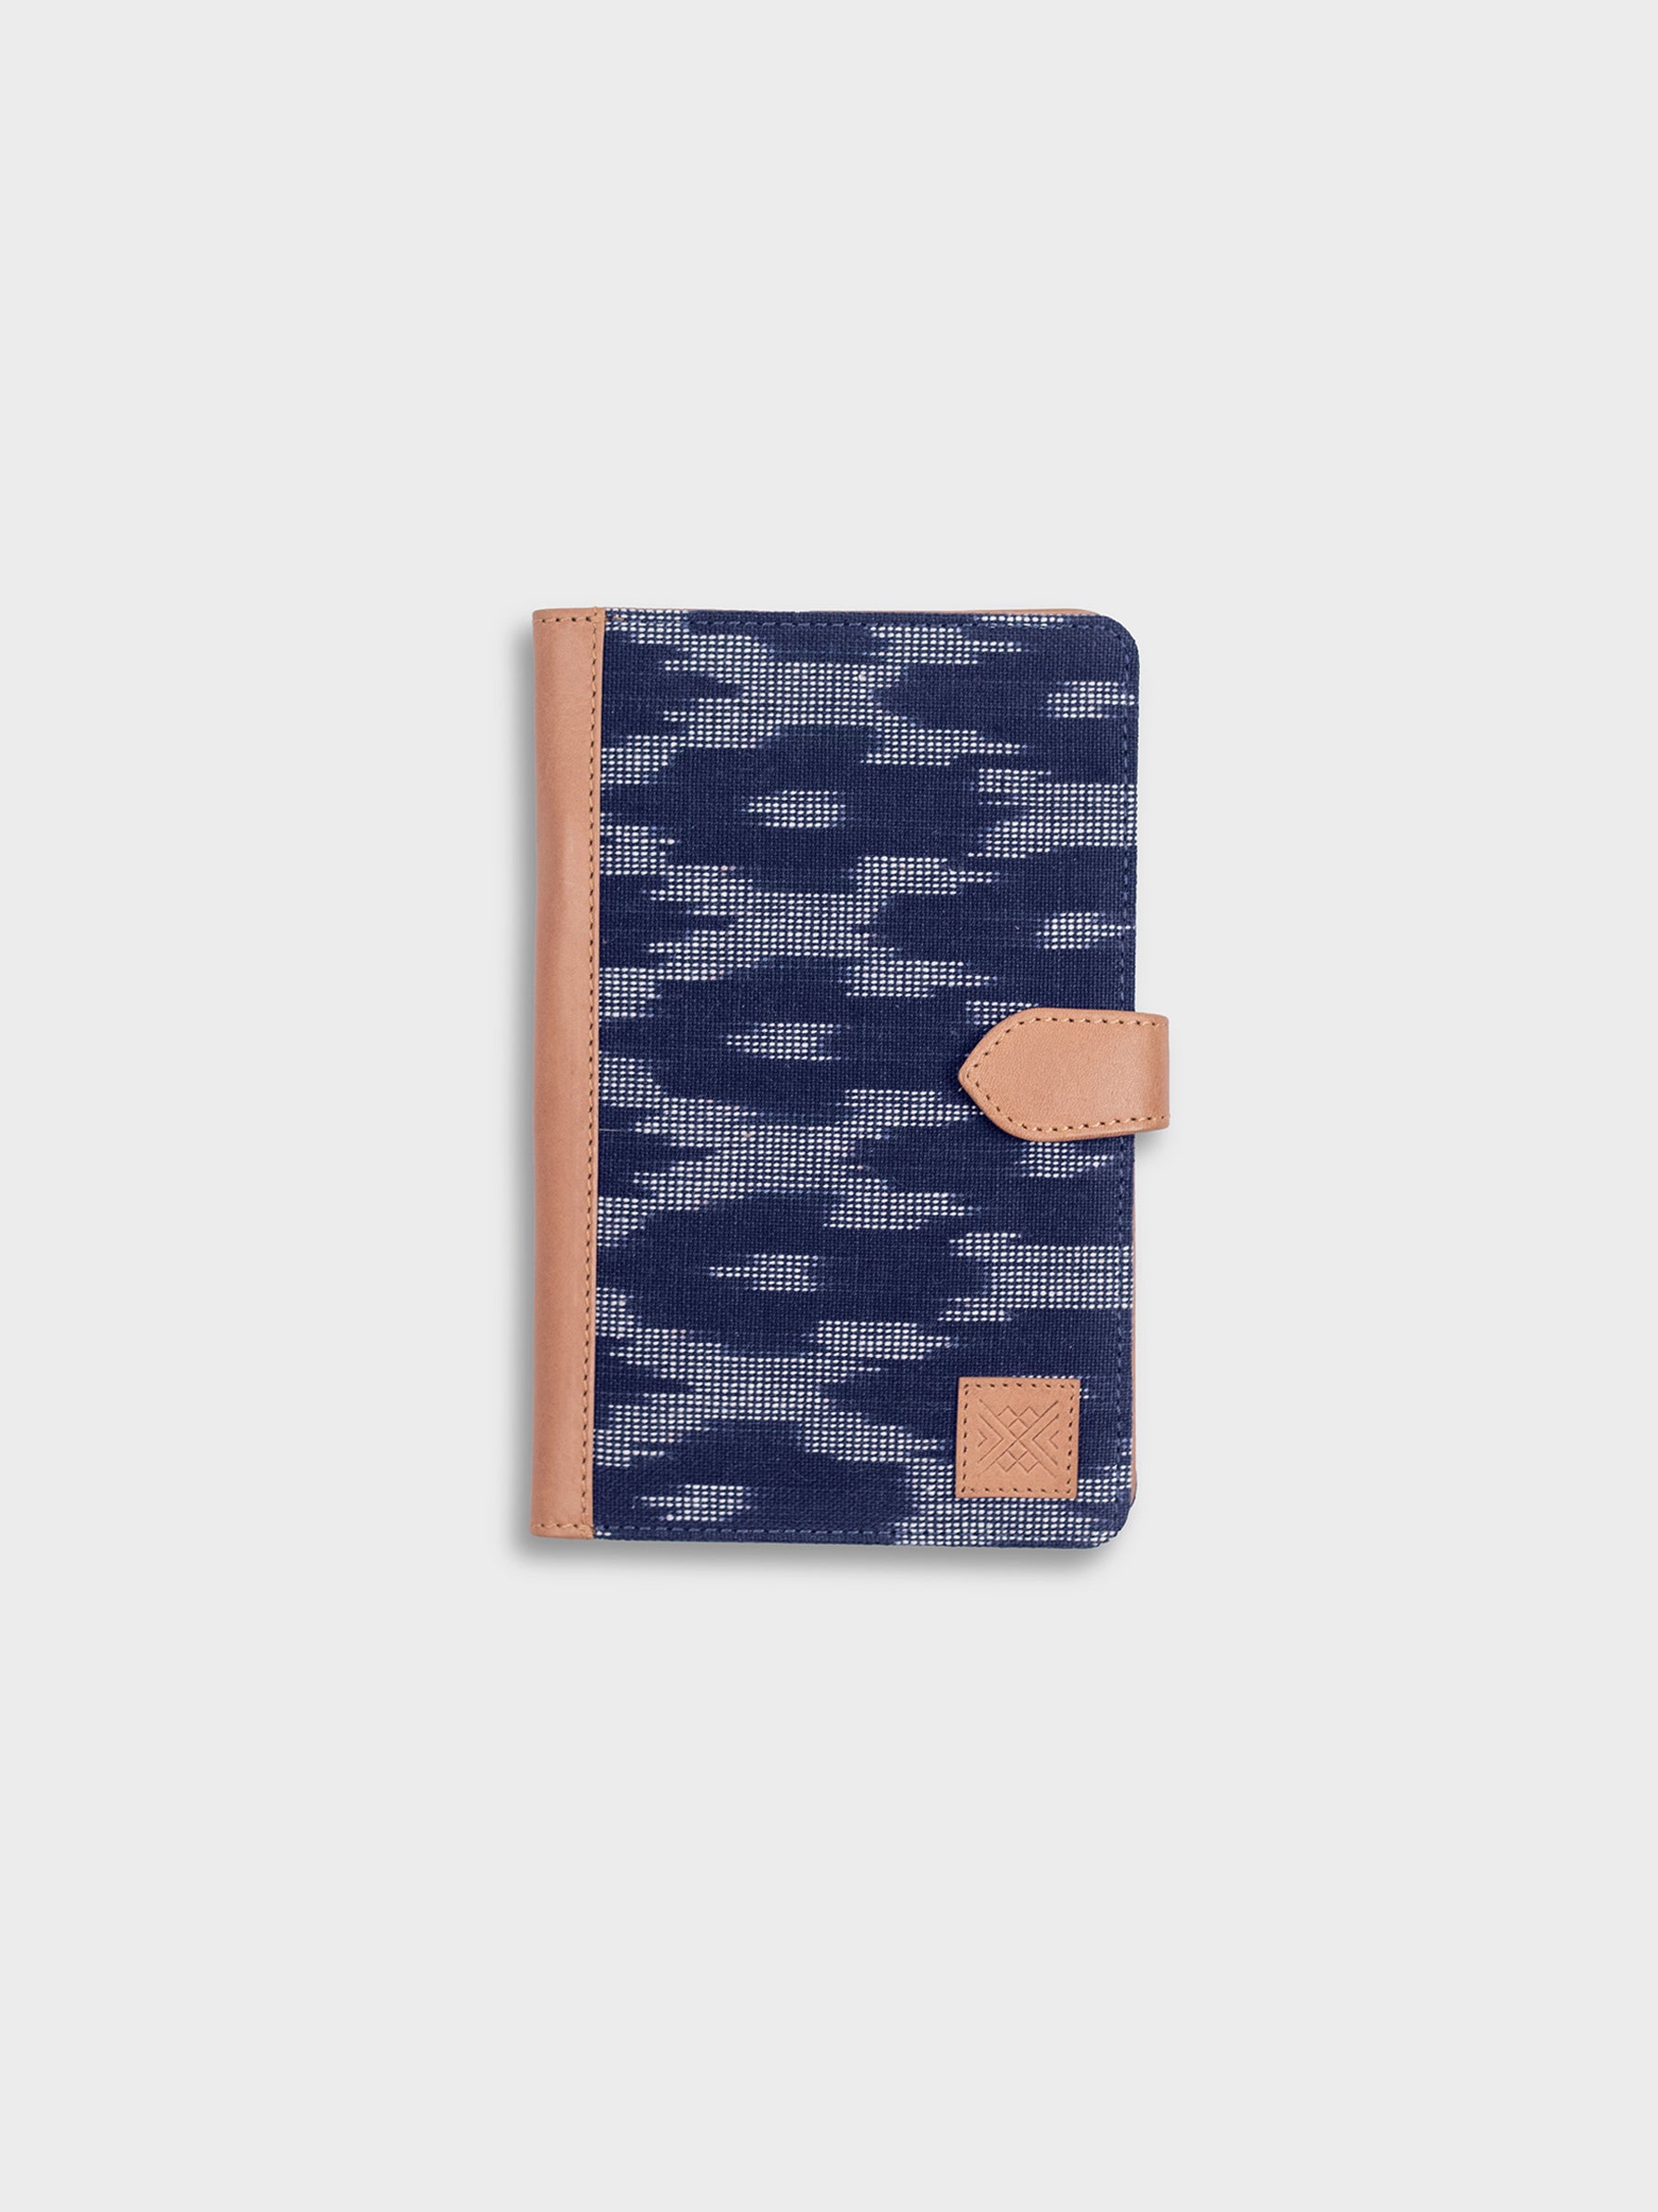 Handcrafted Premium Genuine Vegetable Tanned Leather & Ikat Navy Blue Passport Holder for Women Tan & Loom